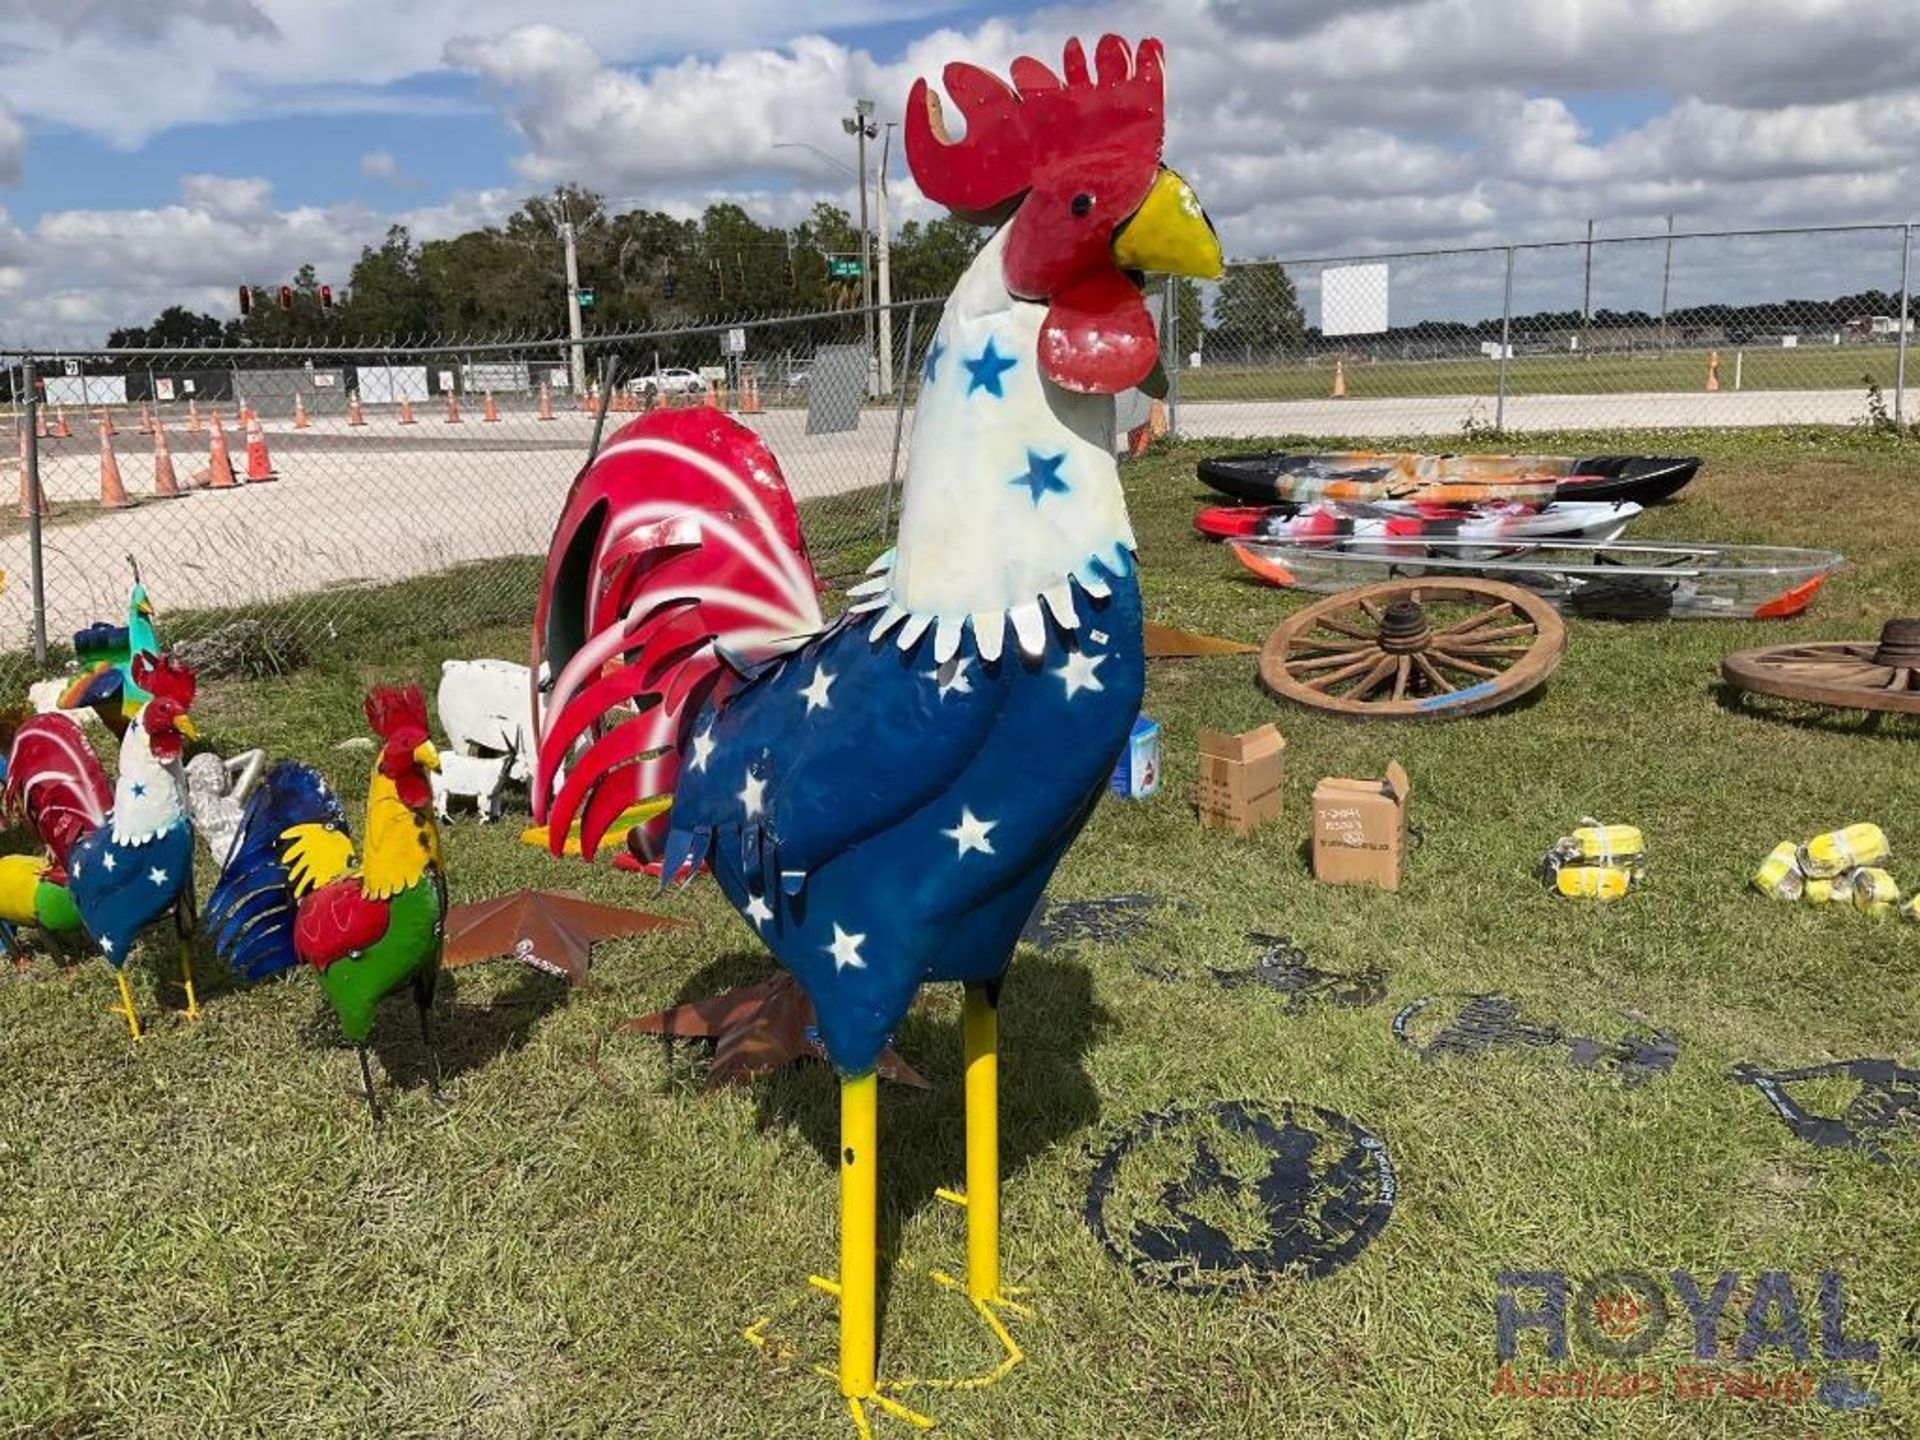 Human Sized Sheet Metal Rooster Decoration - Image 2 of 4